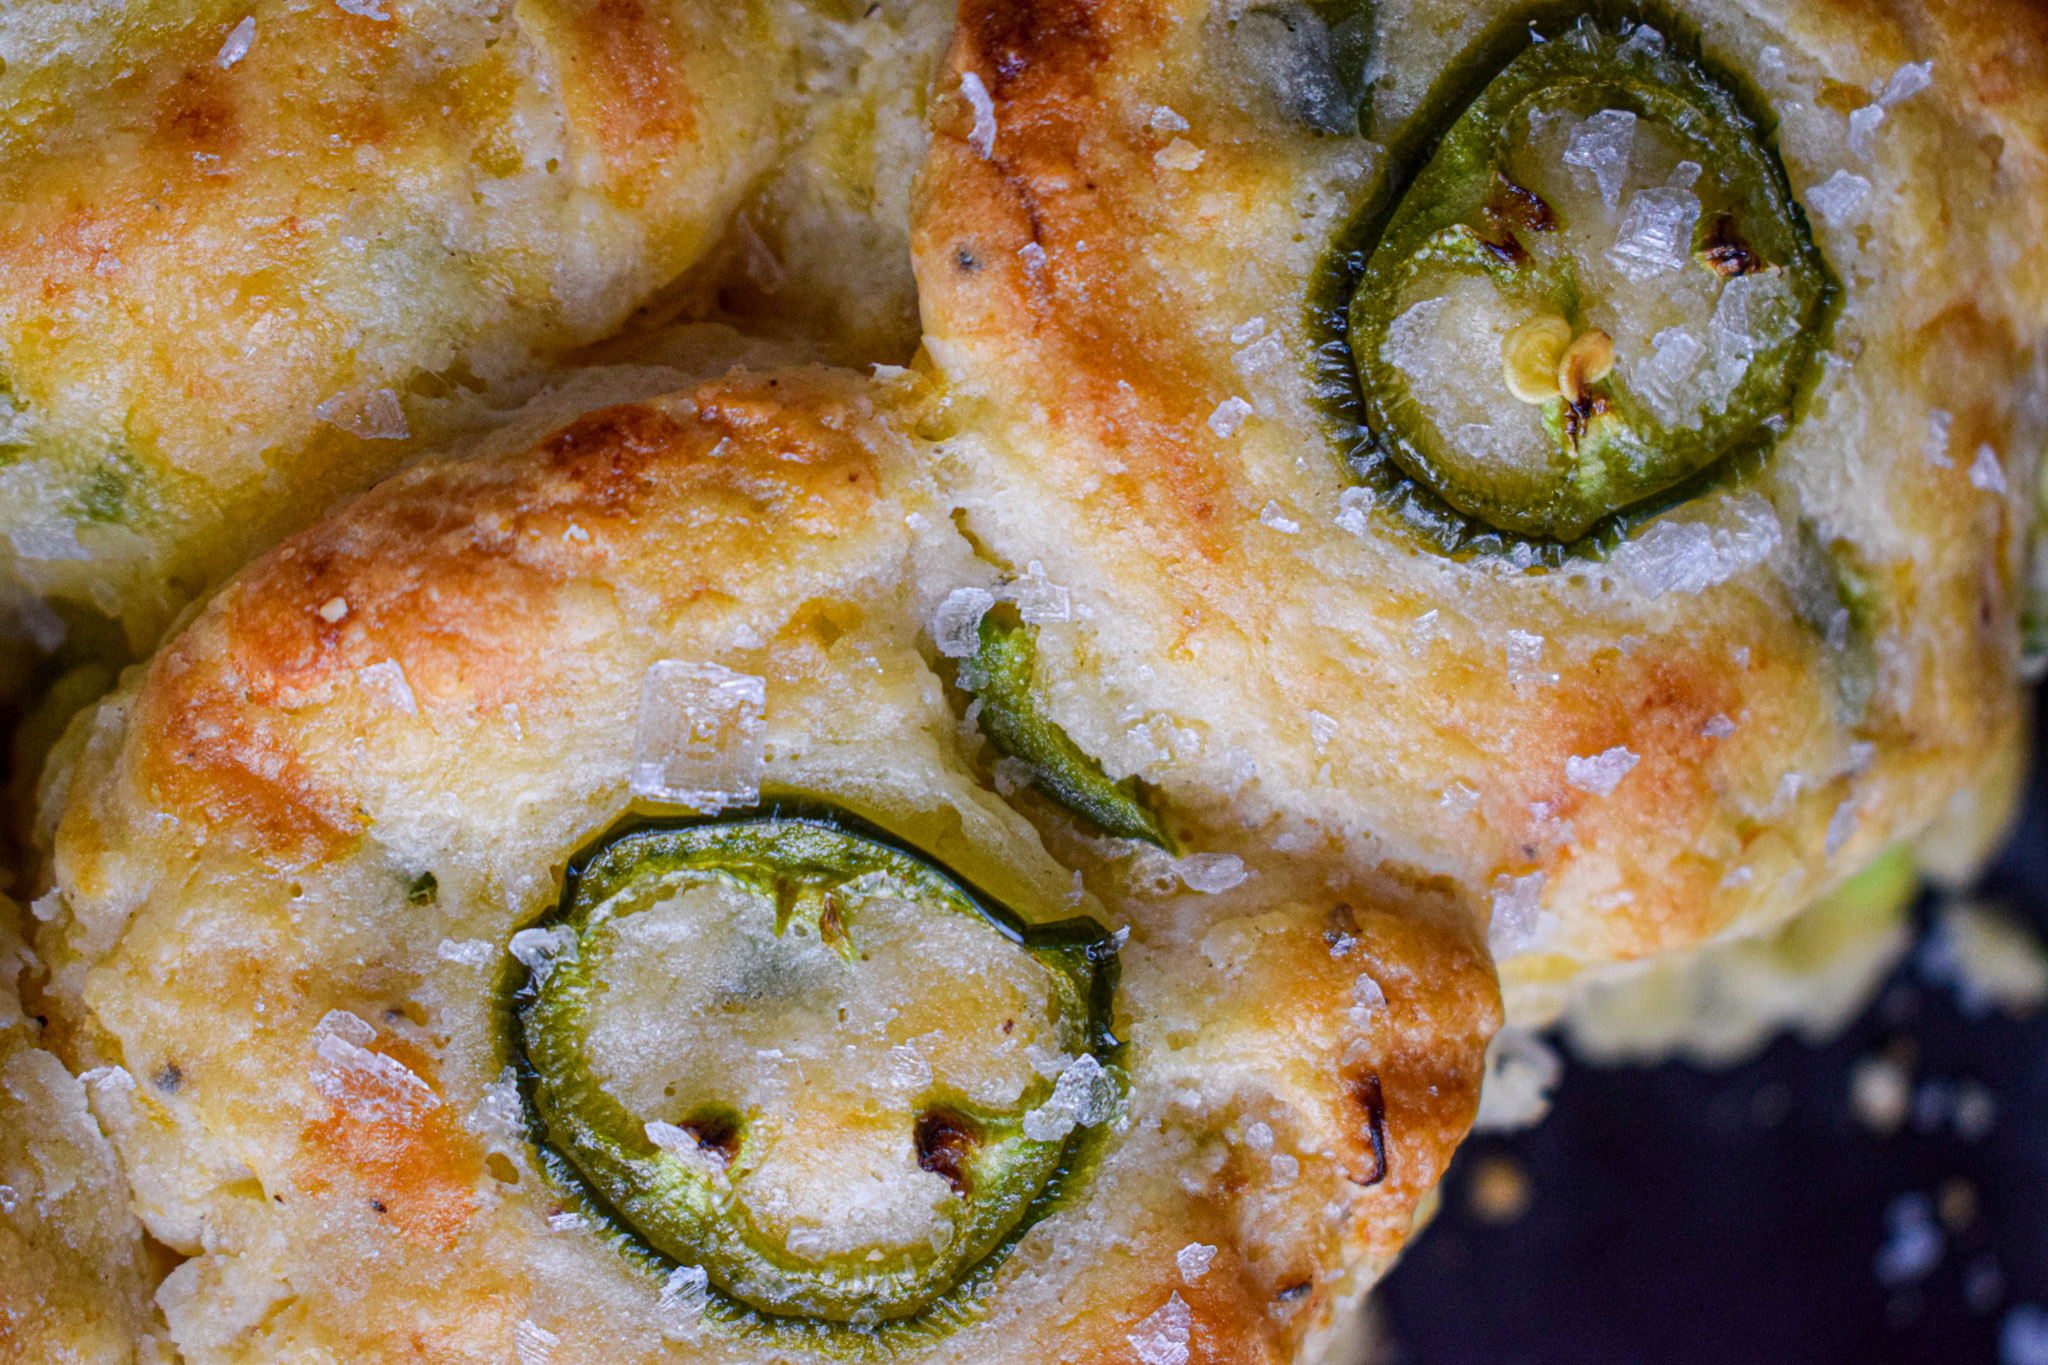 homemade buttermilk biscuits with cheese and jalapenos